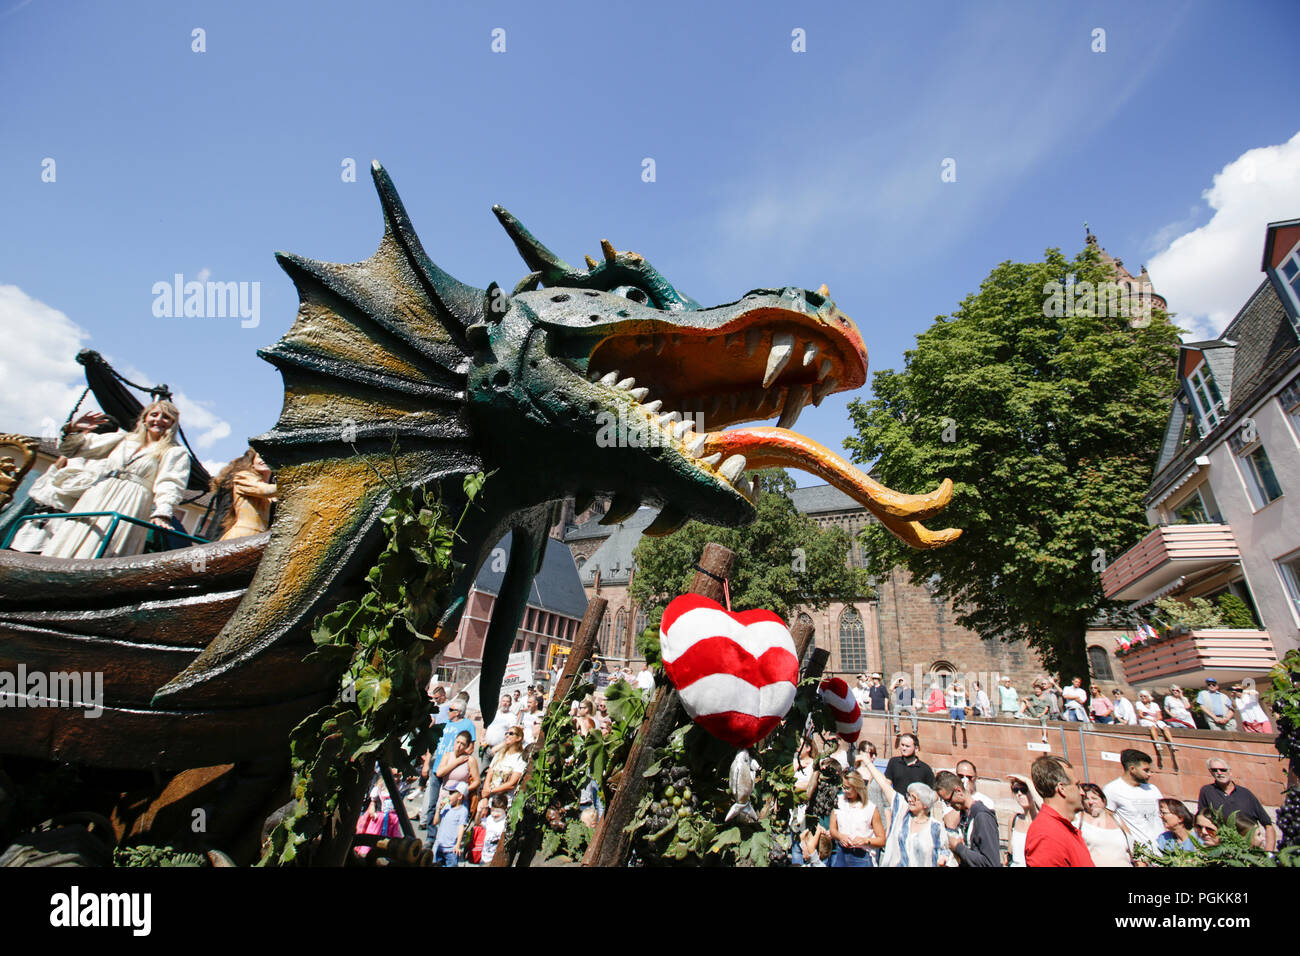 Worms, Germany. 26th Aug, 2018. A dragon's head, the dragon is a symbol for the city of Worms, is pictured on a float. The first highlight of the 2018 Backfischfest was the big parade through the city of Worms with over 70 groups and floats. Community groups, music groups and businesses from Worms and further afield took part. Credit: Michael Debets/Pacific Press/Alamy Live News Stock Photo